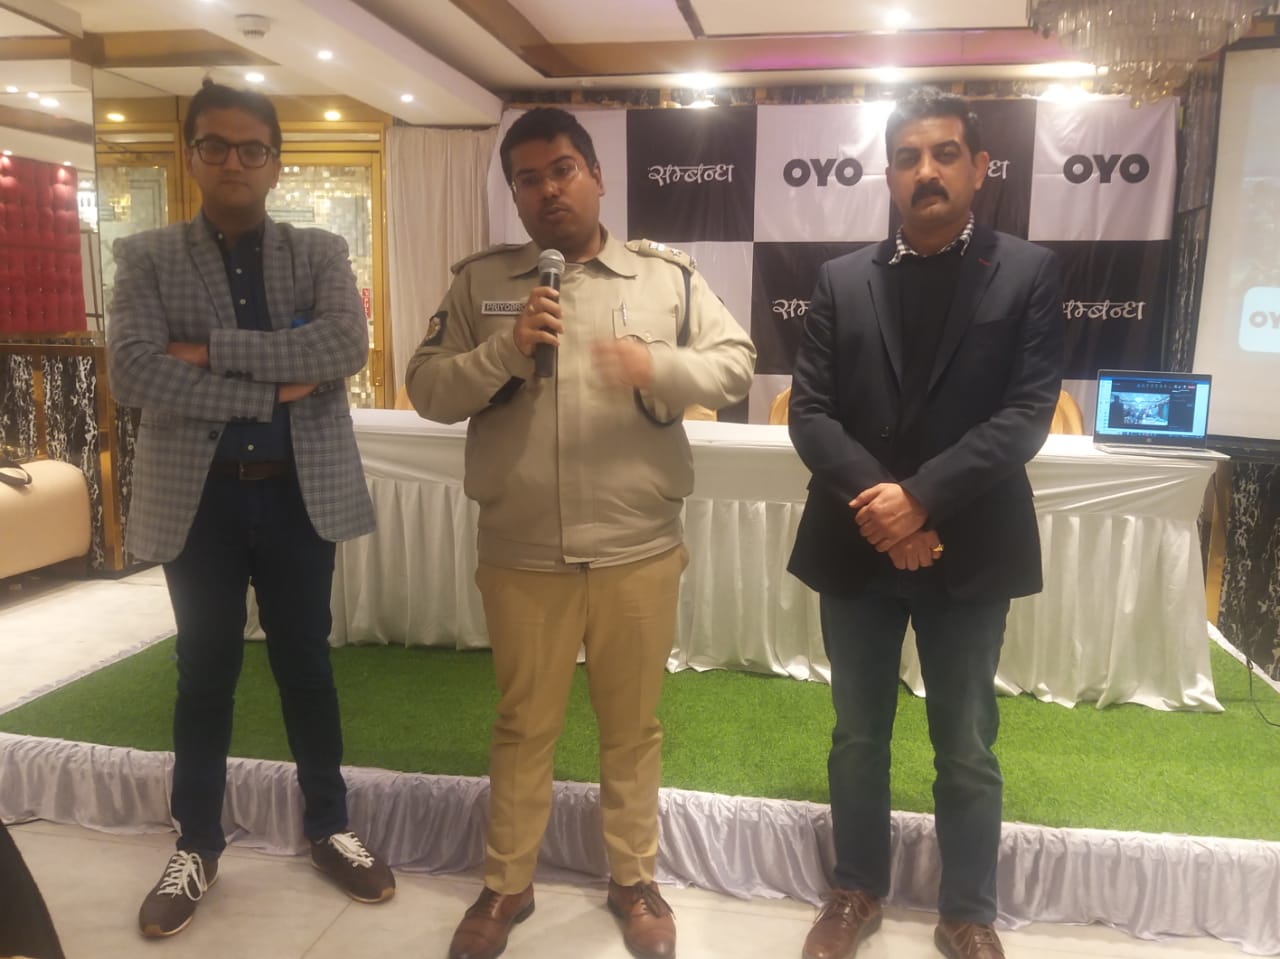 Police and OYO launch joint operation to curb immoral activities in Kolkata hotels